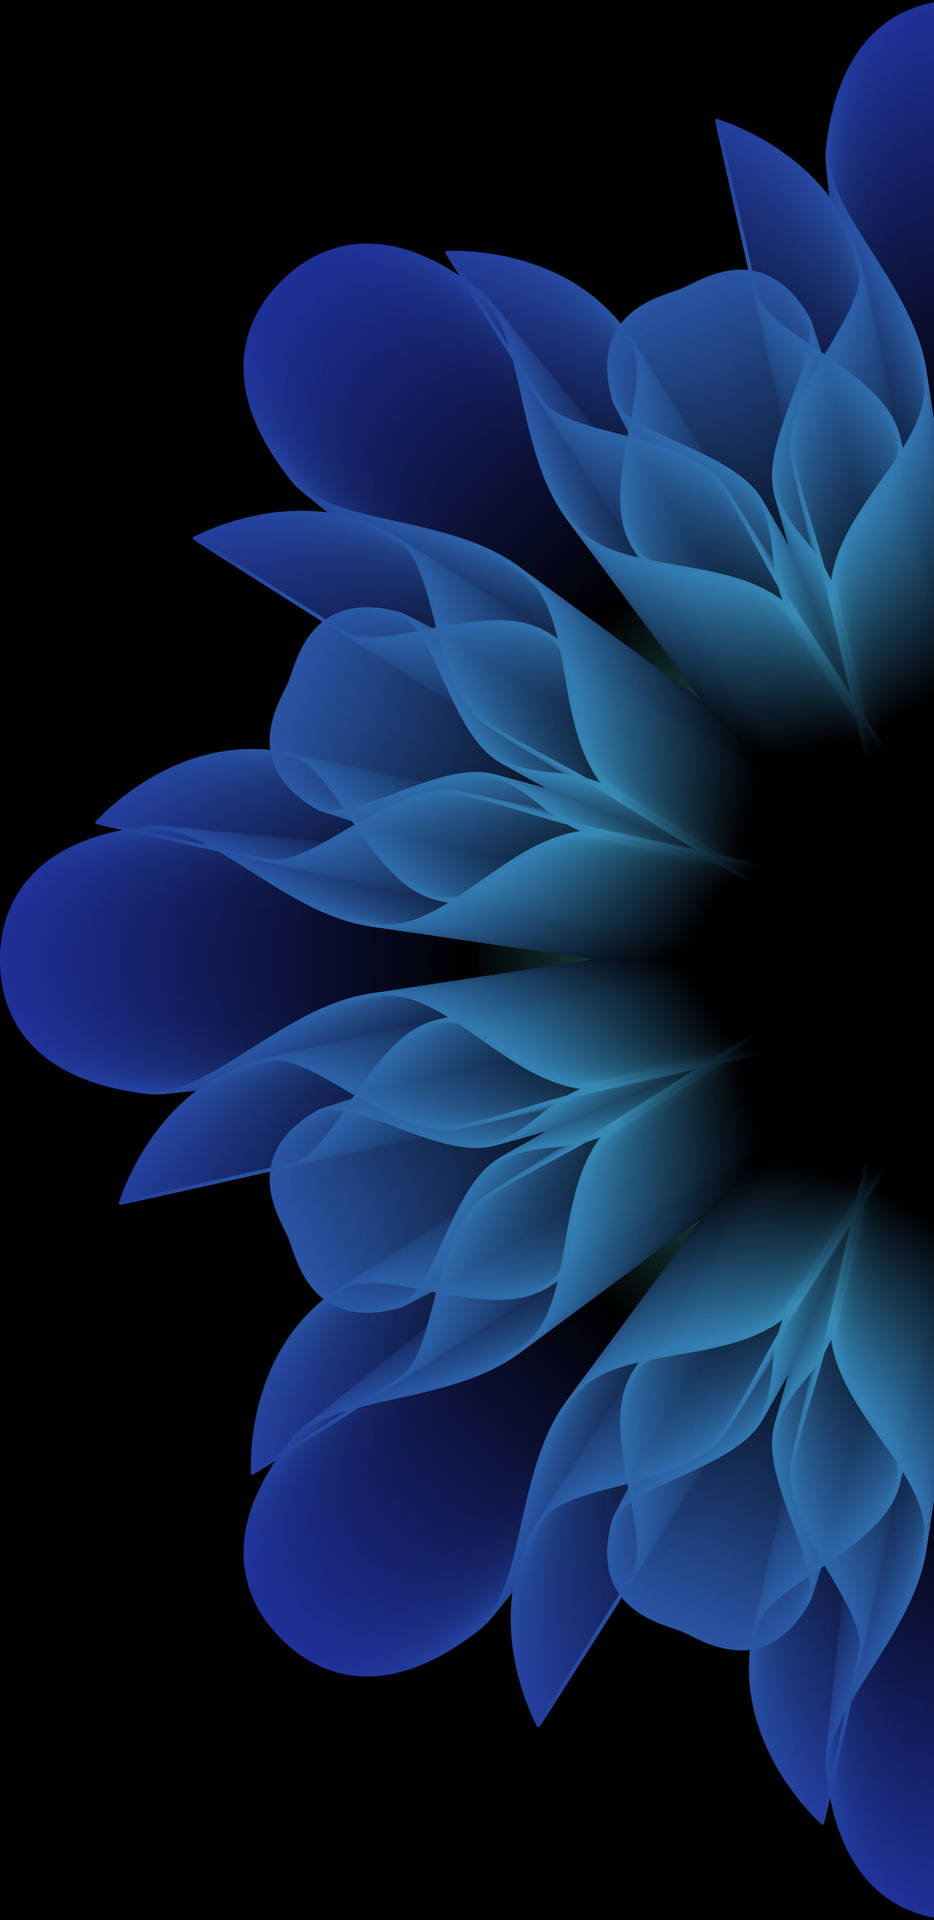 Amoled Android Solid Pastel Blue Flower Background